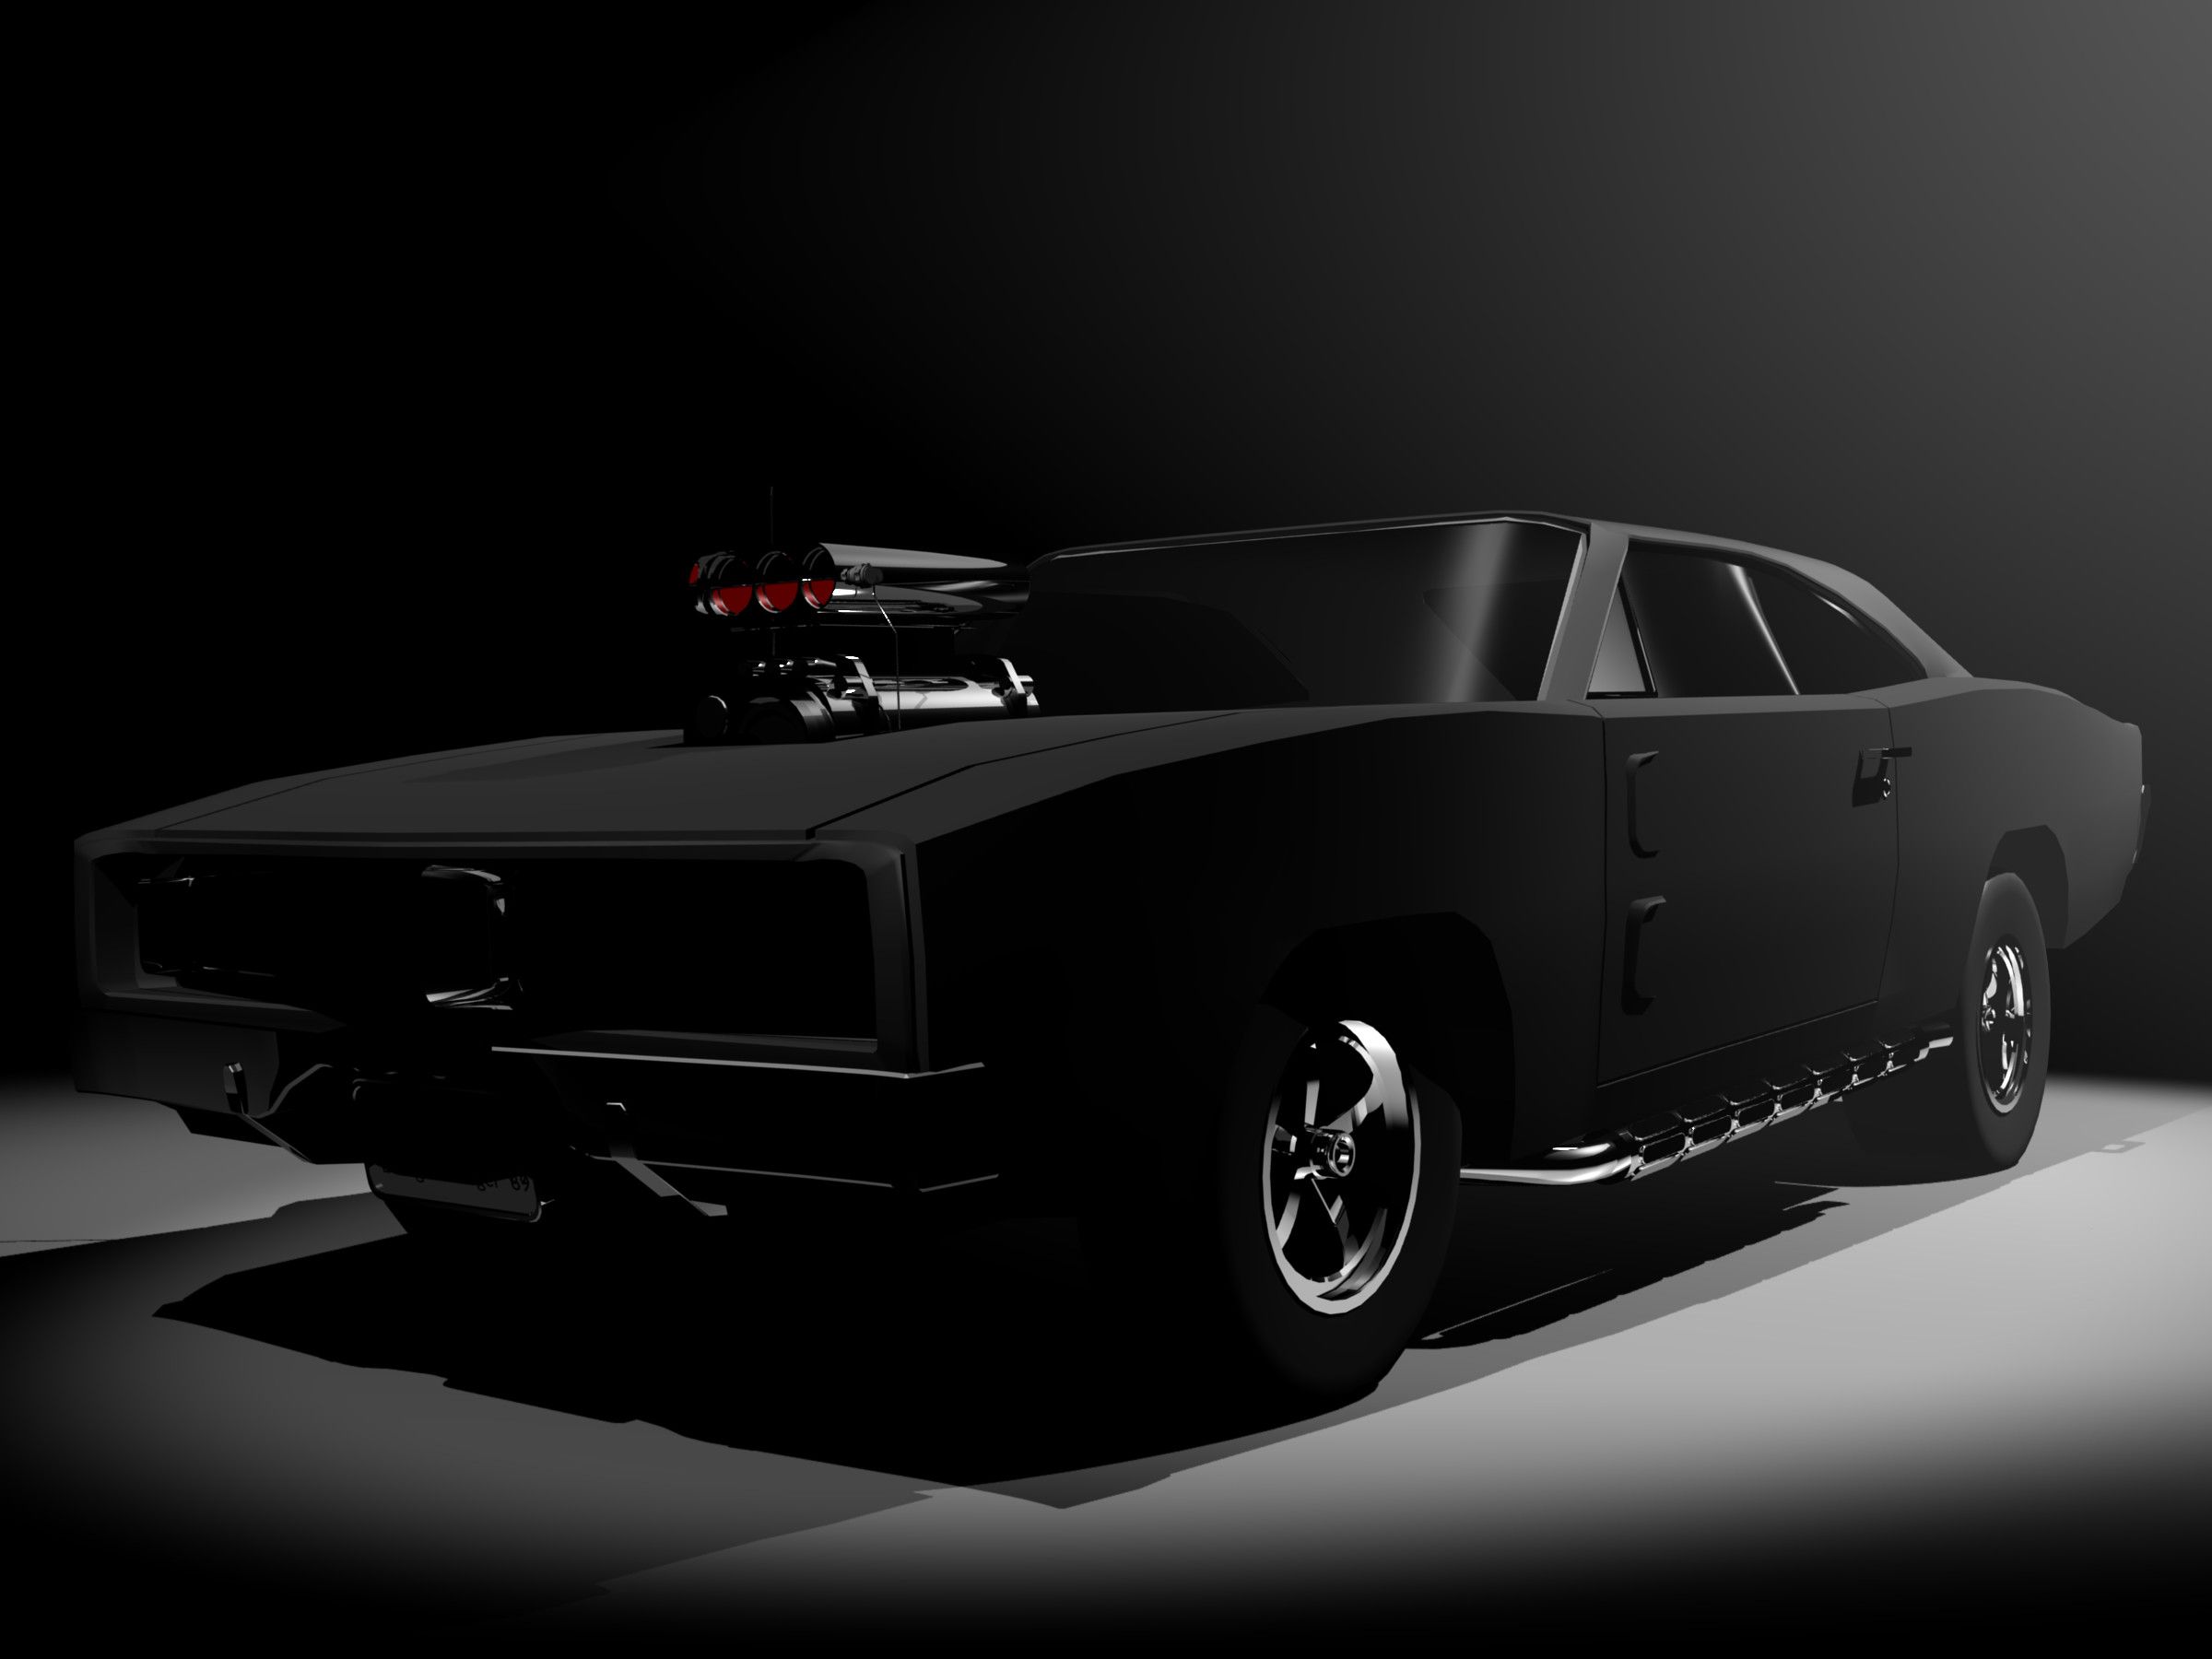 Dodge Charger Wallpaper background picture